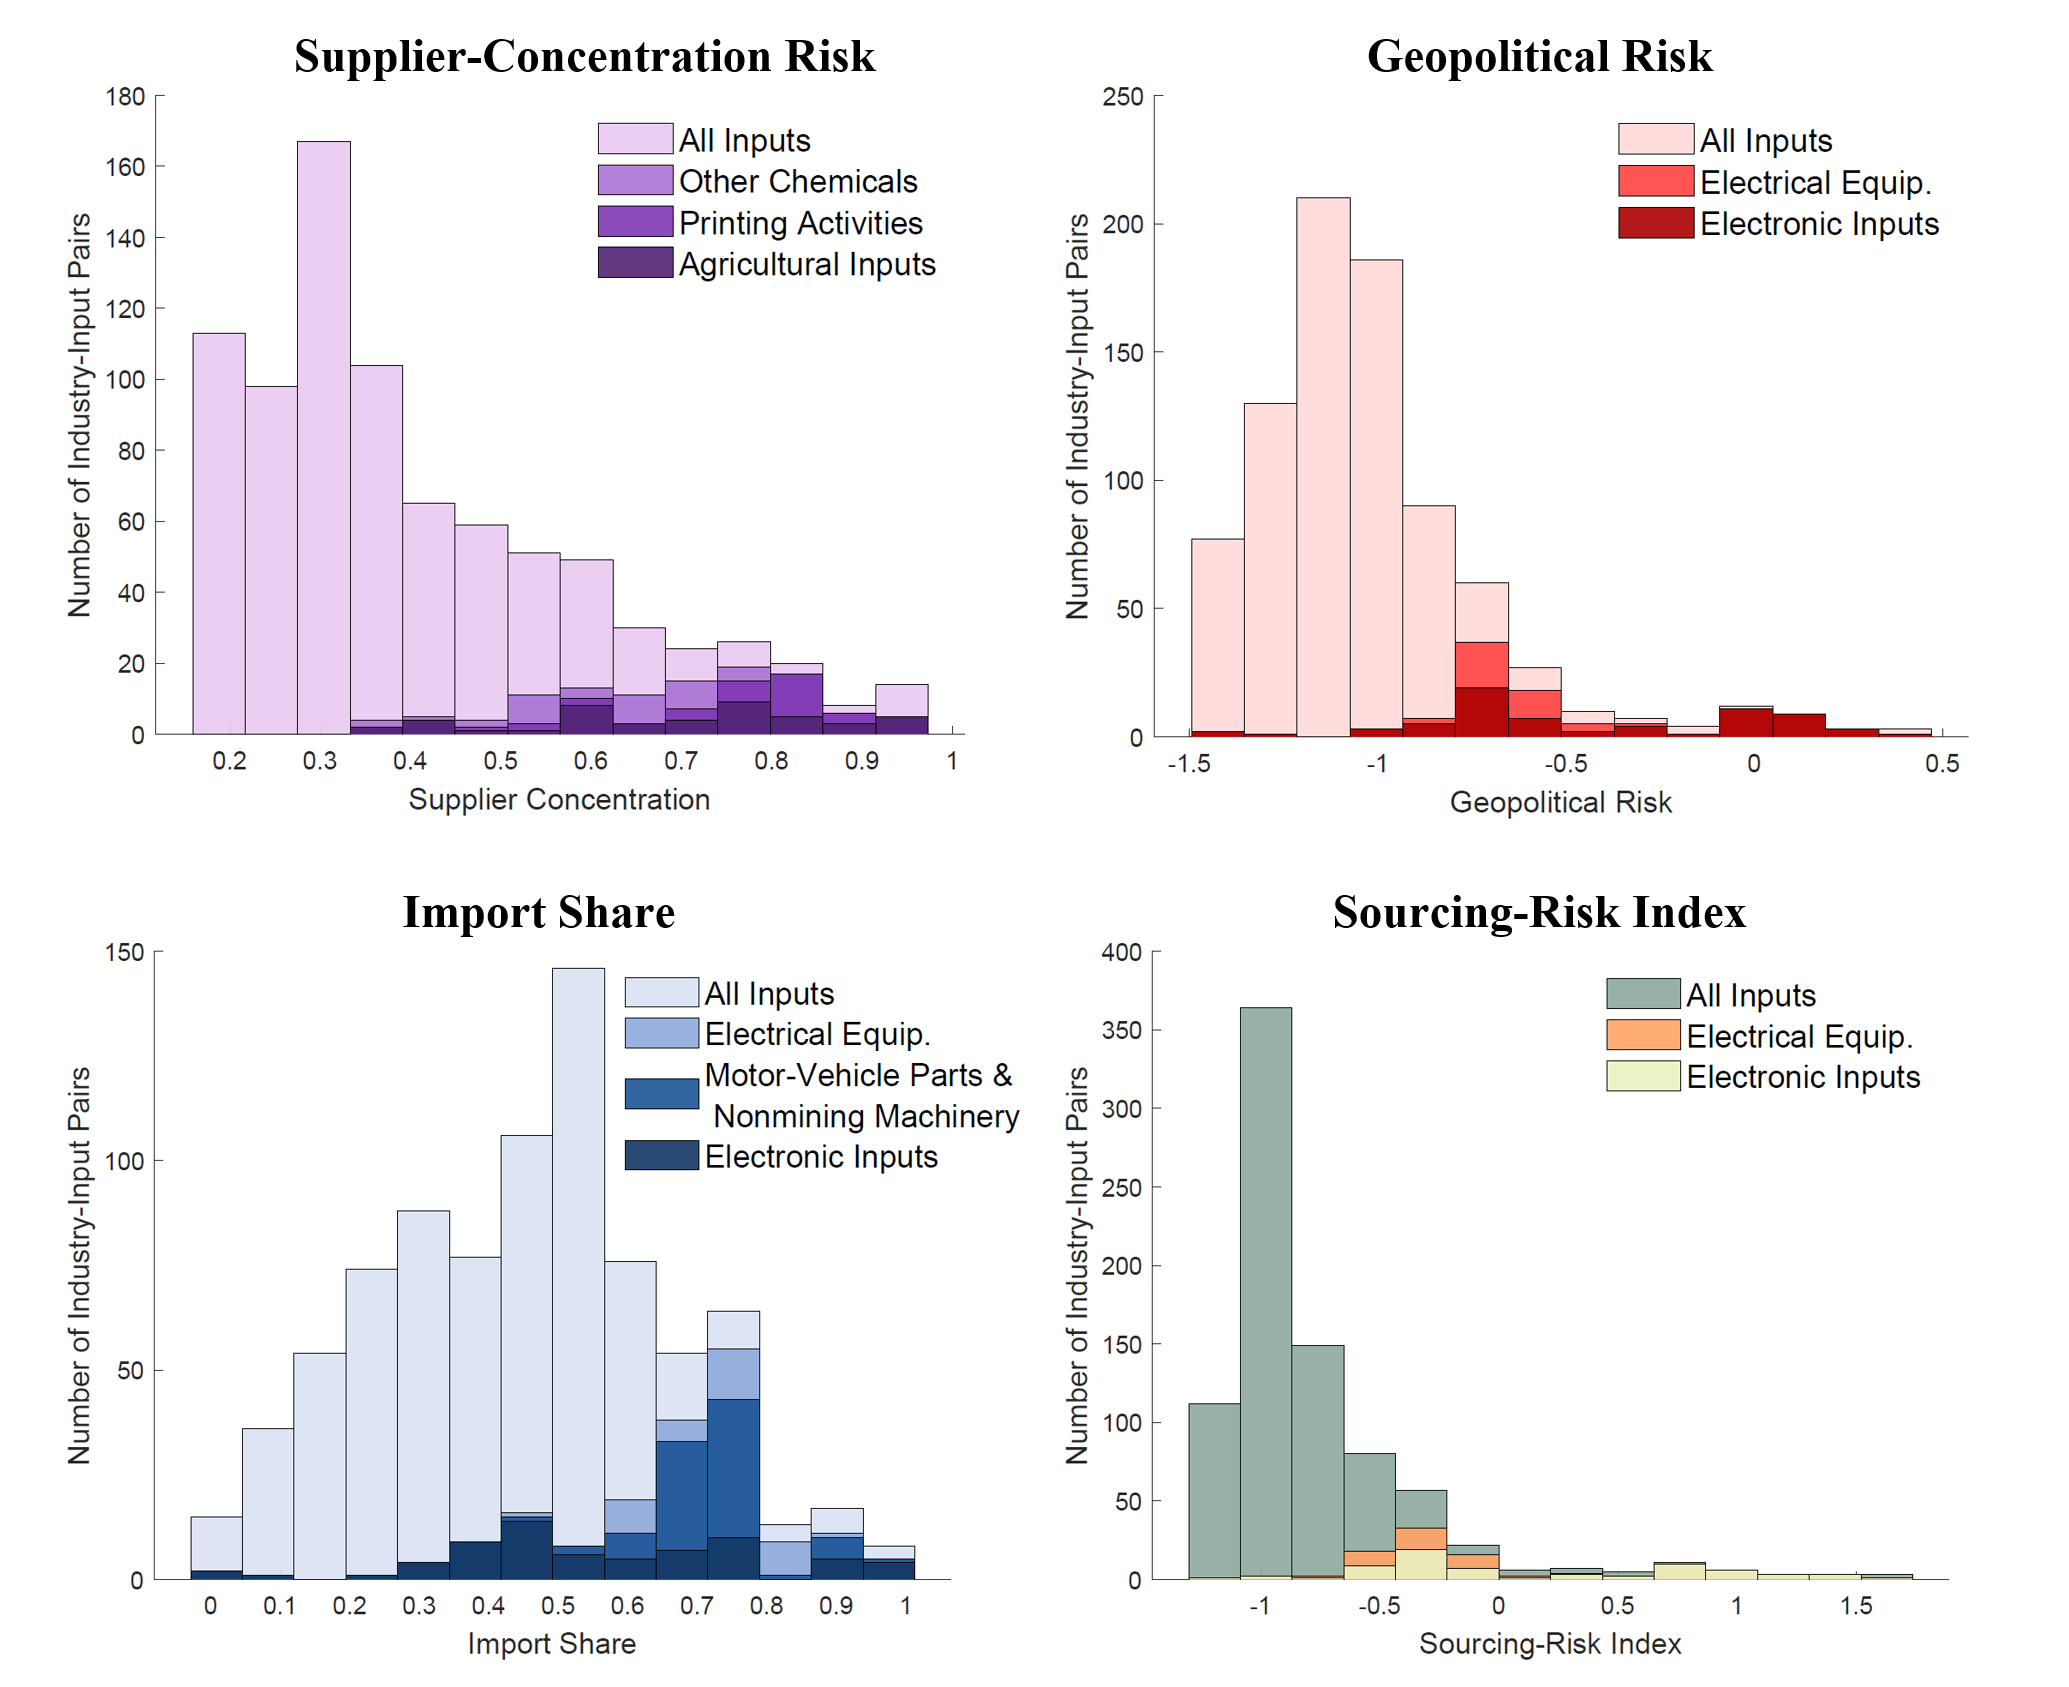 Figure 6. Distribution of Sourcing-Risk Index and Subcomponents across Industry-Input Pairs, 2019. See accessible link for data.